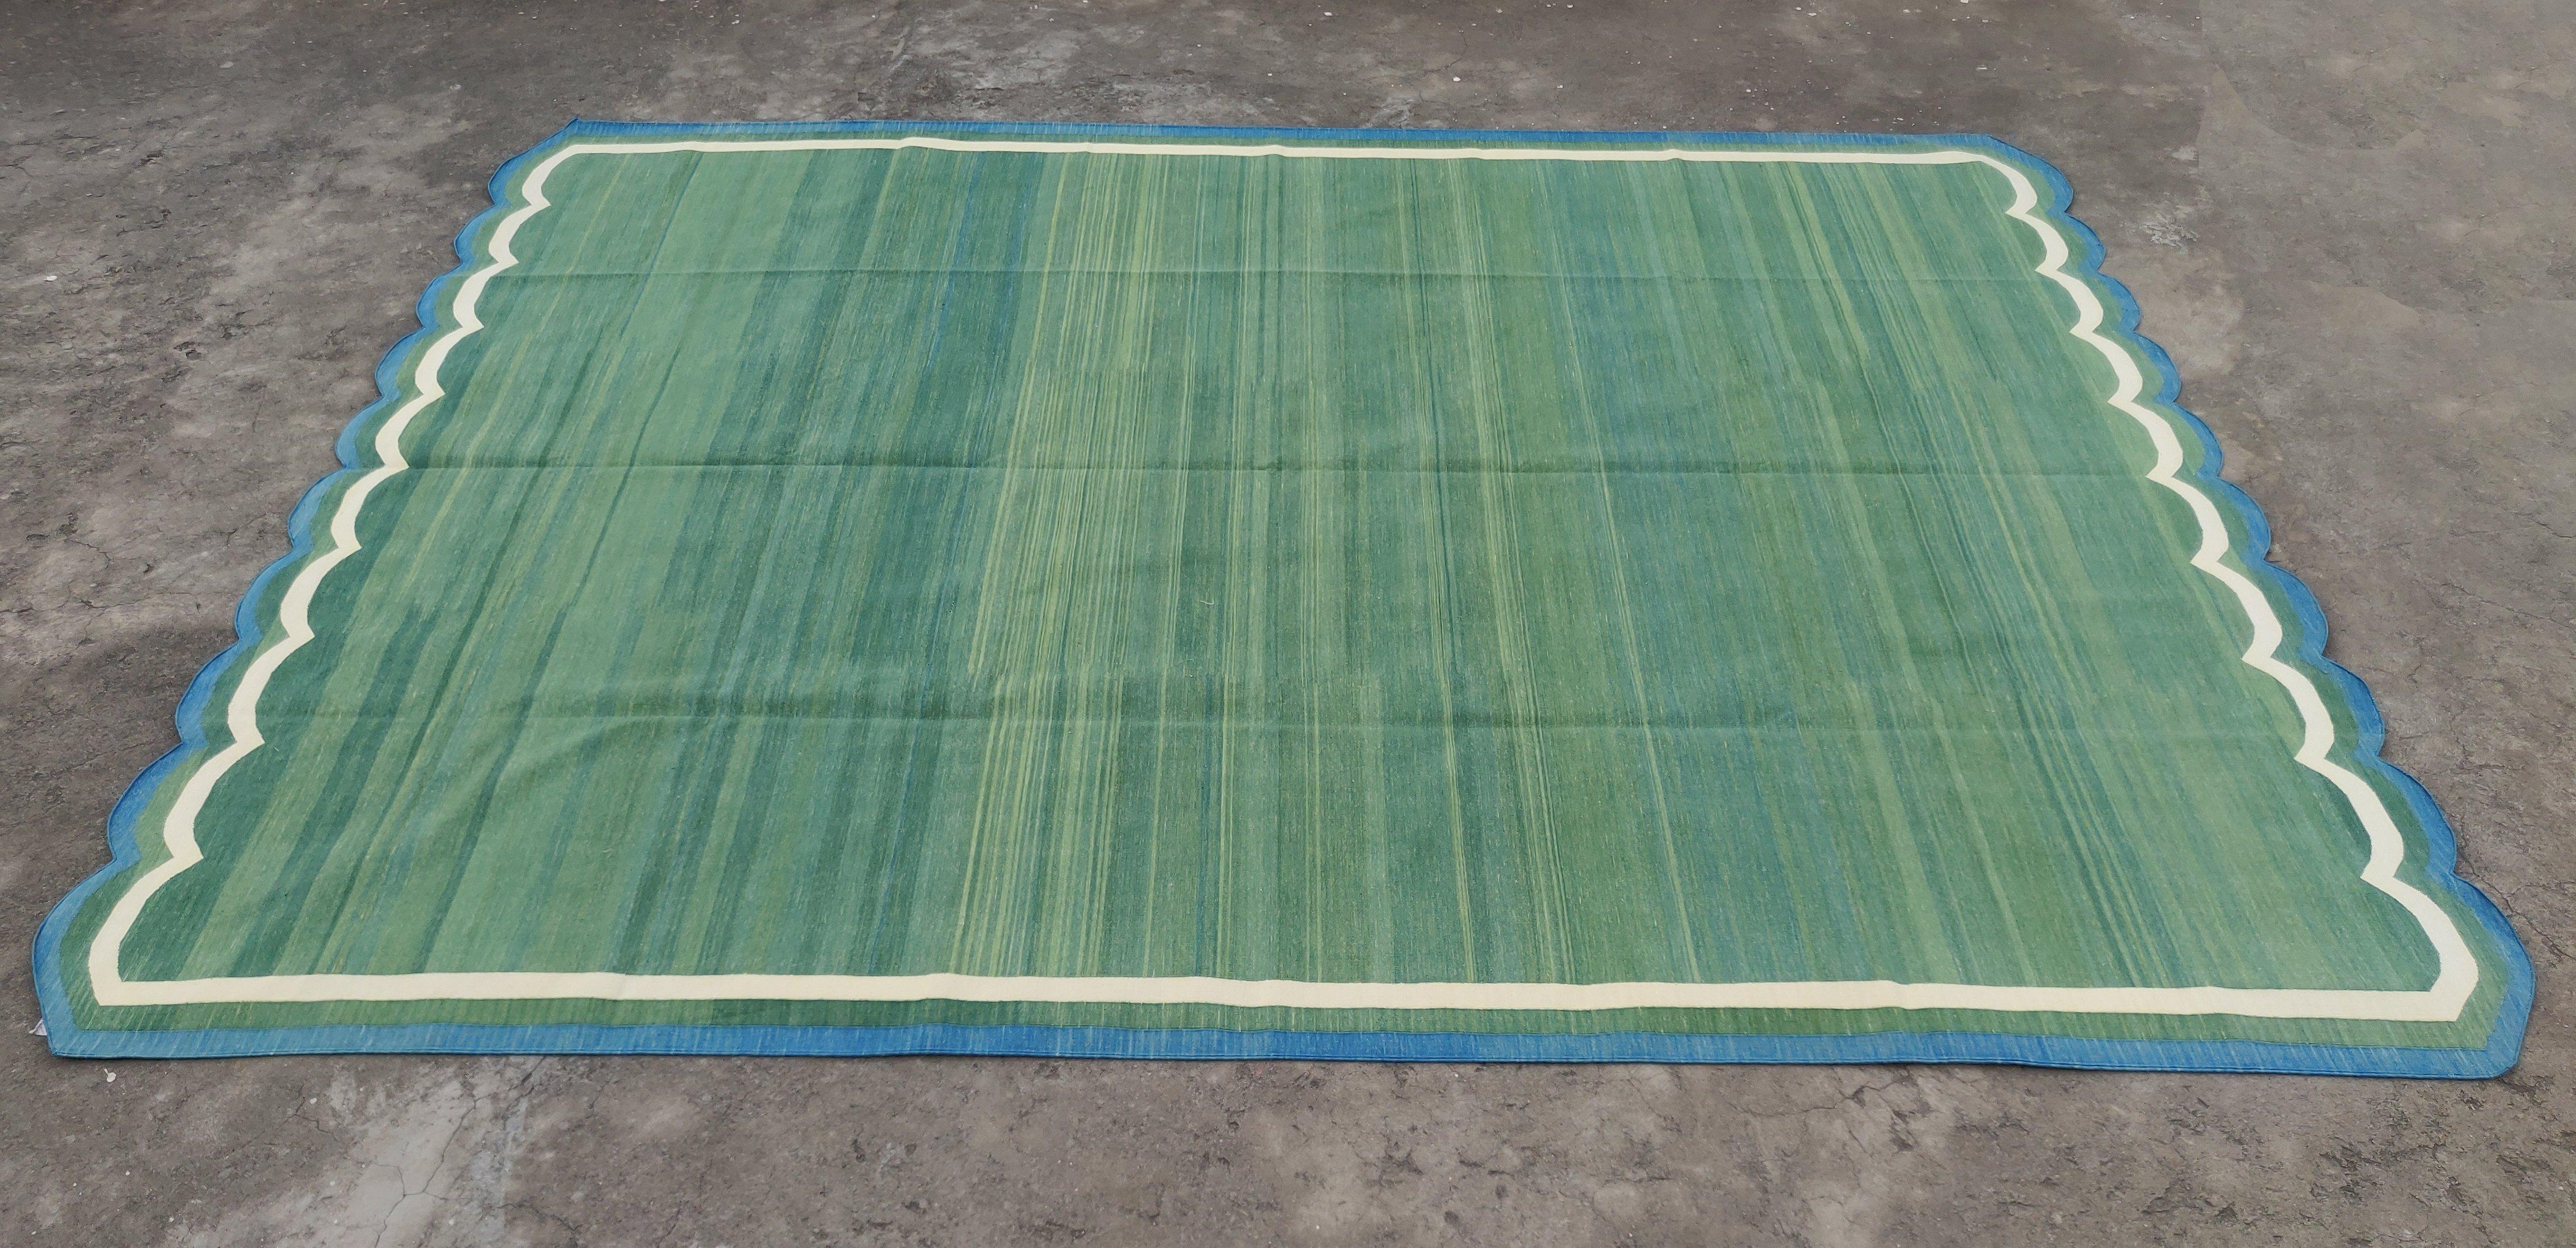 Handmade Cotton Area Flat Weave Rug, 10x14 Green And Blue Scallop Kilim Dhurrie For Sale 5